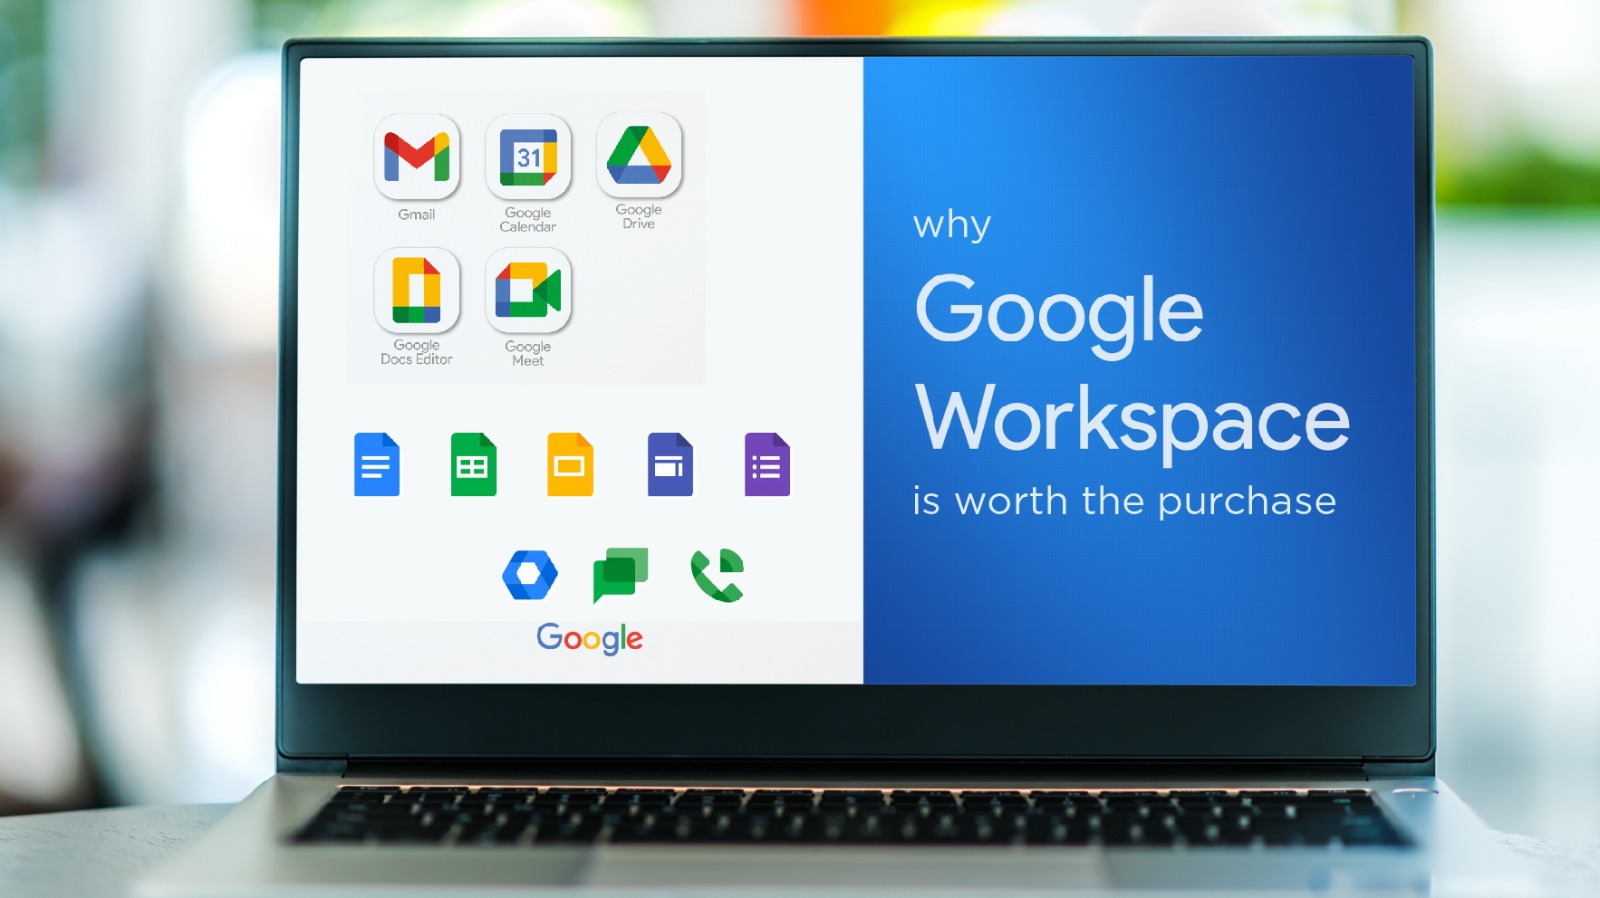 Is Google Workspace really worth the purchase?